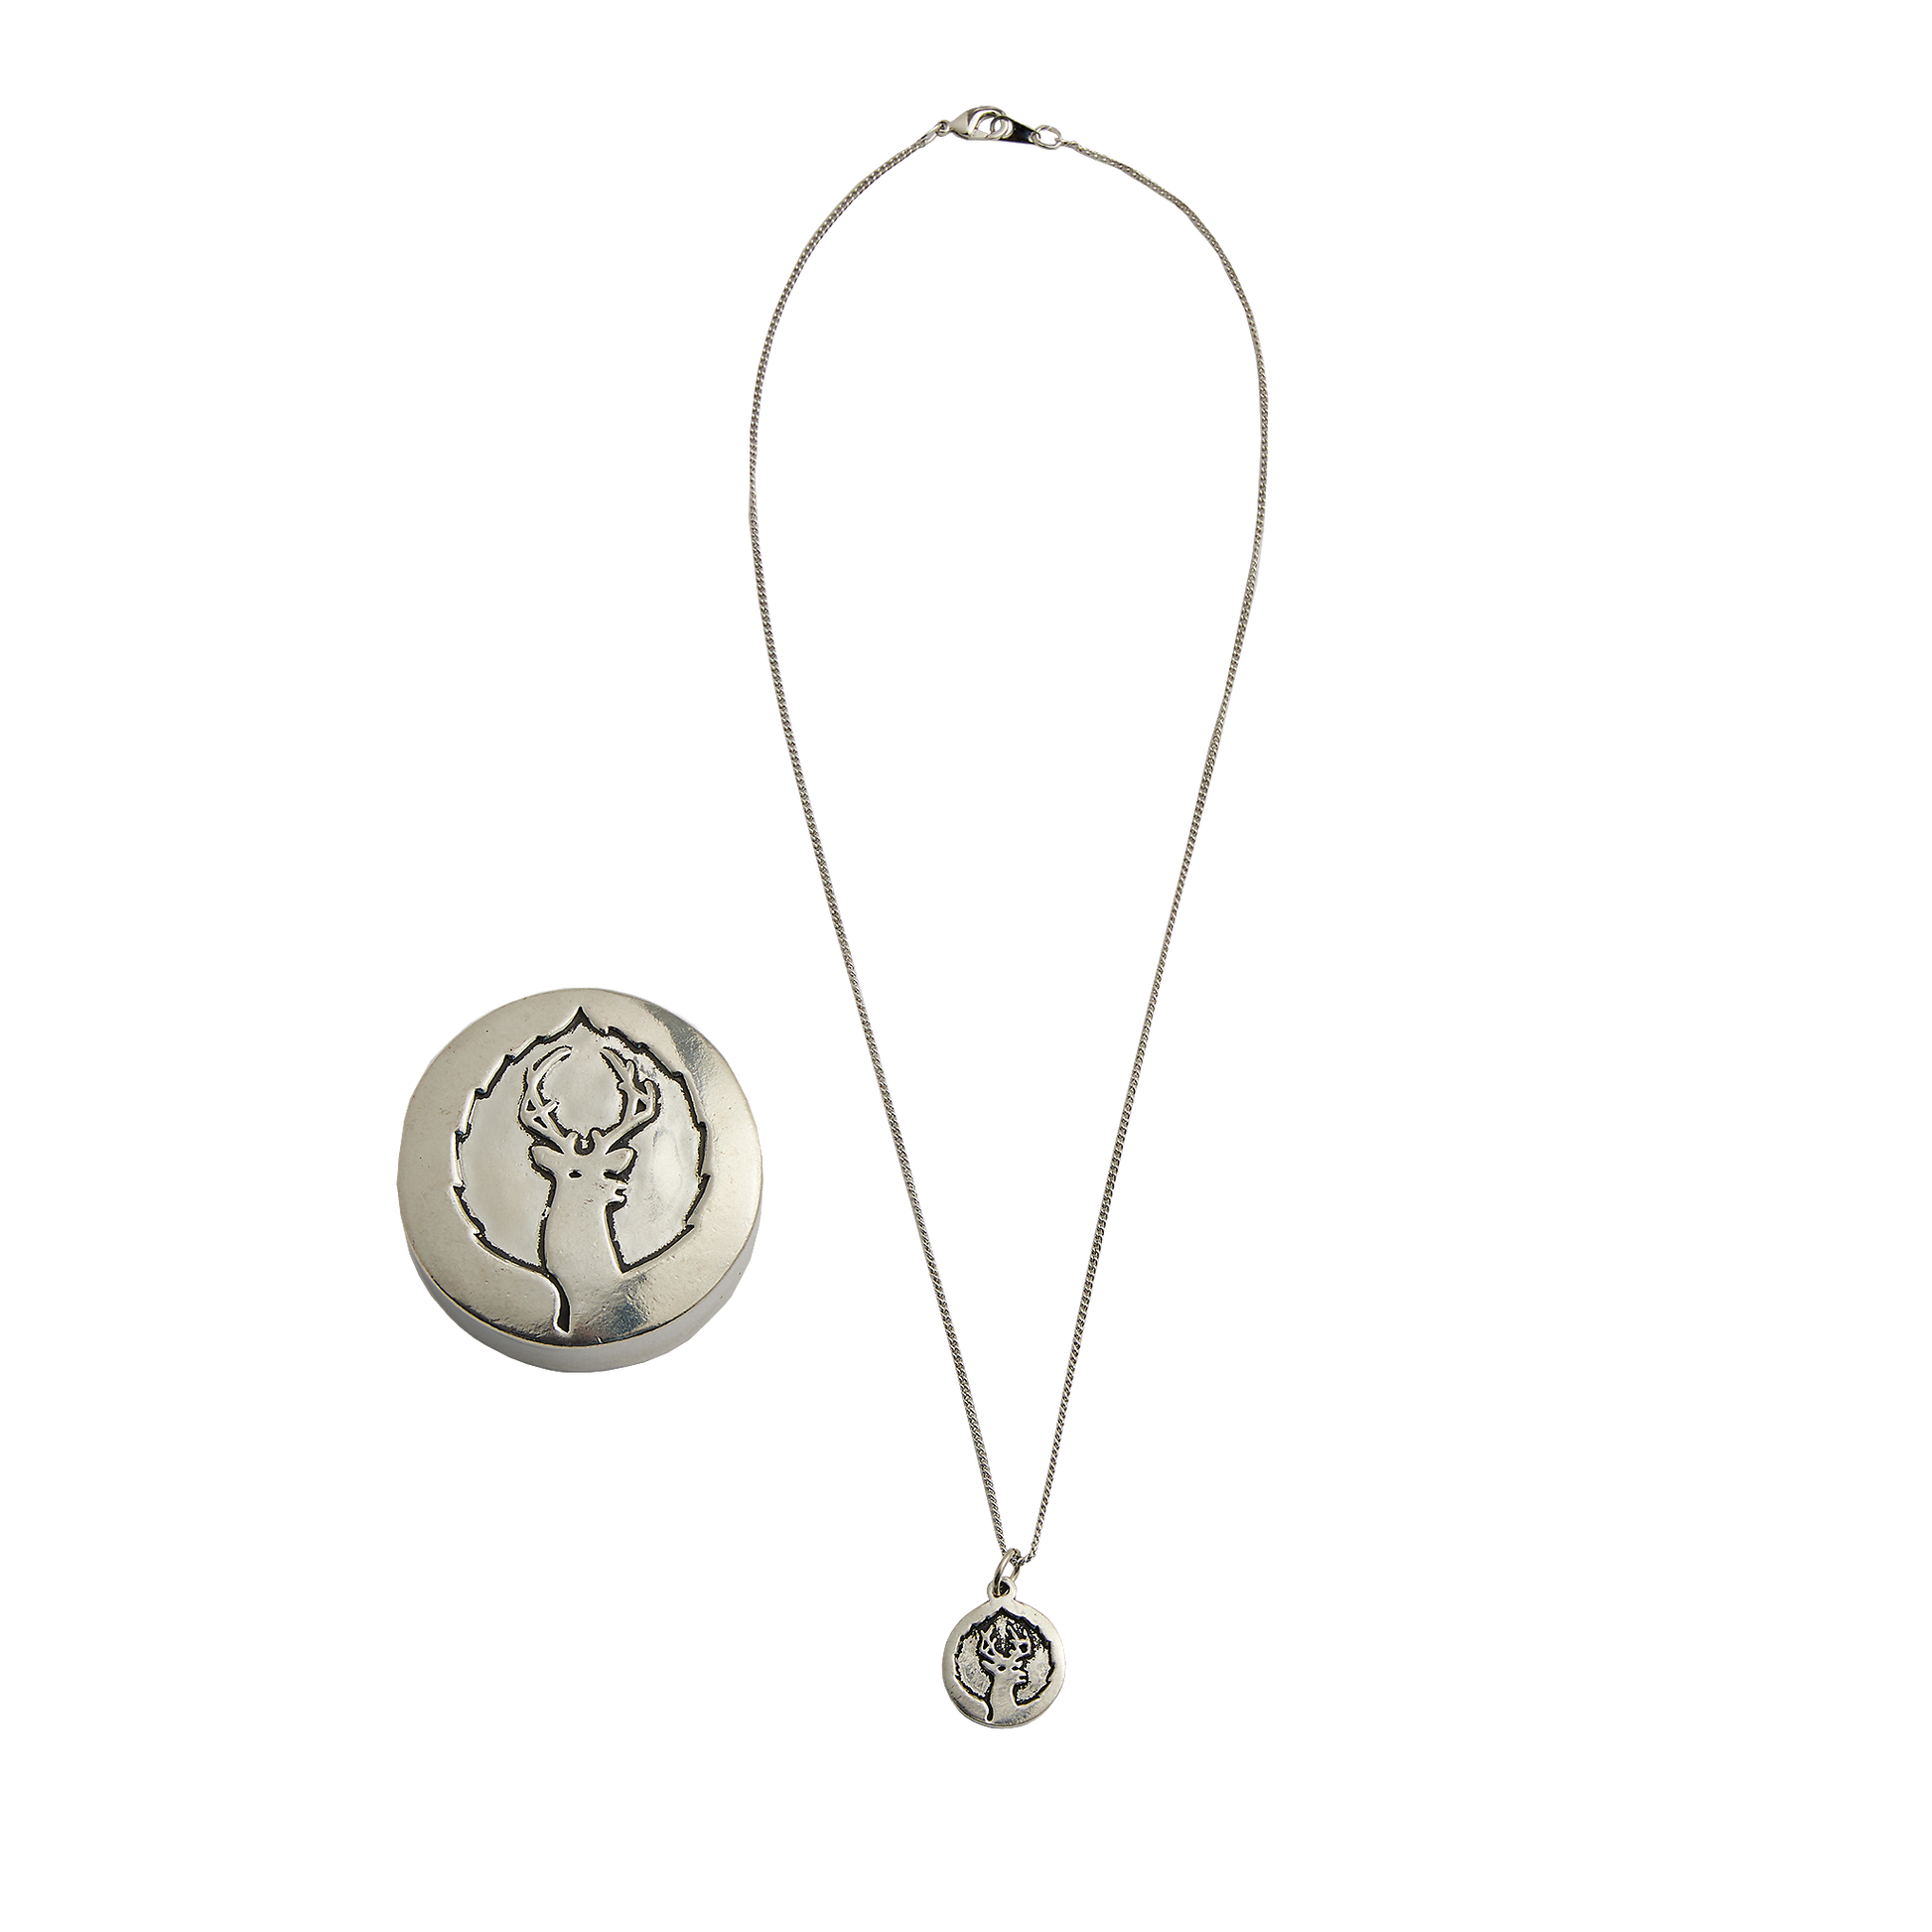 Pewter necklace of deer valleys logo with a wishbox side by side